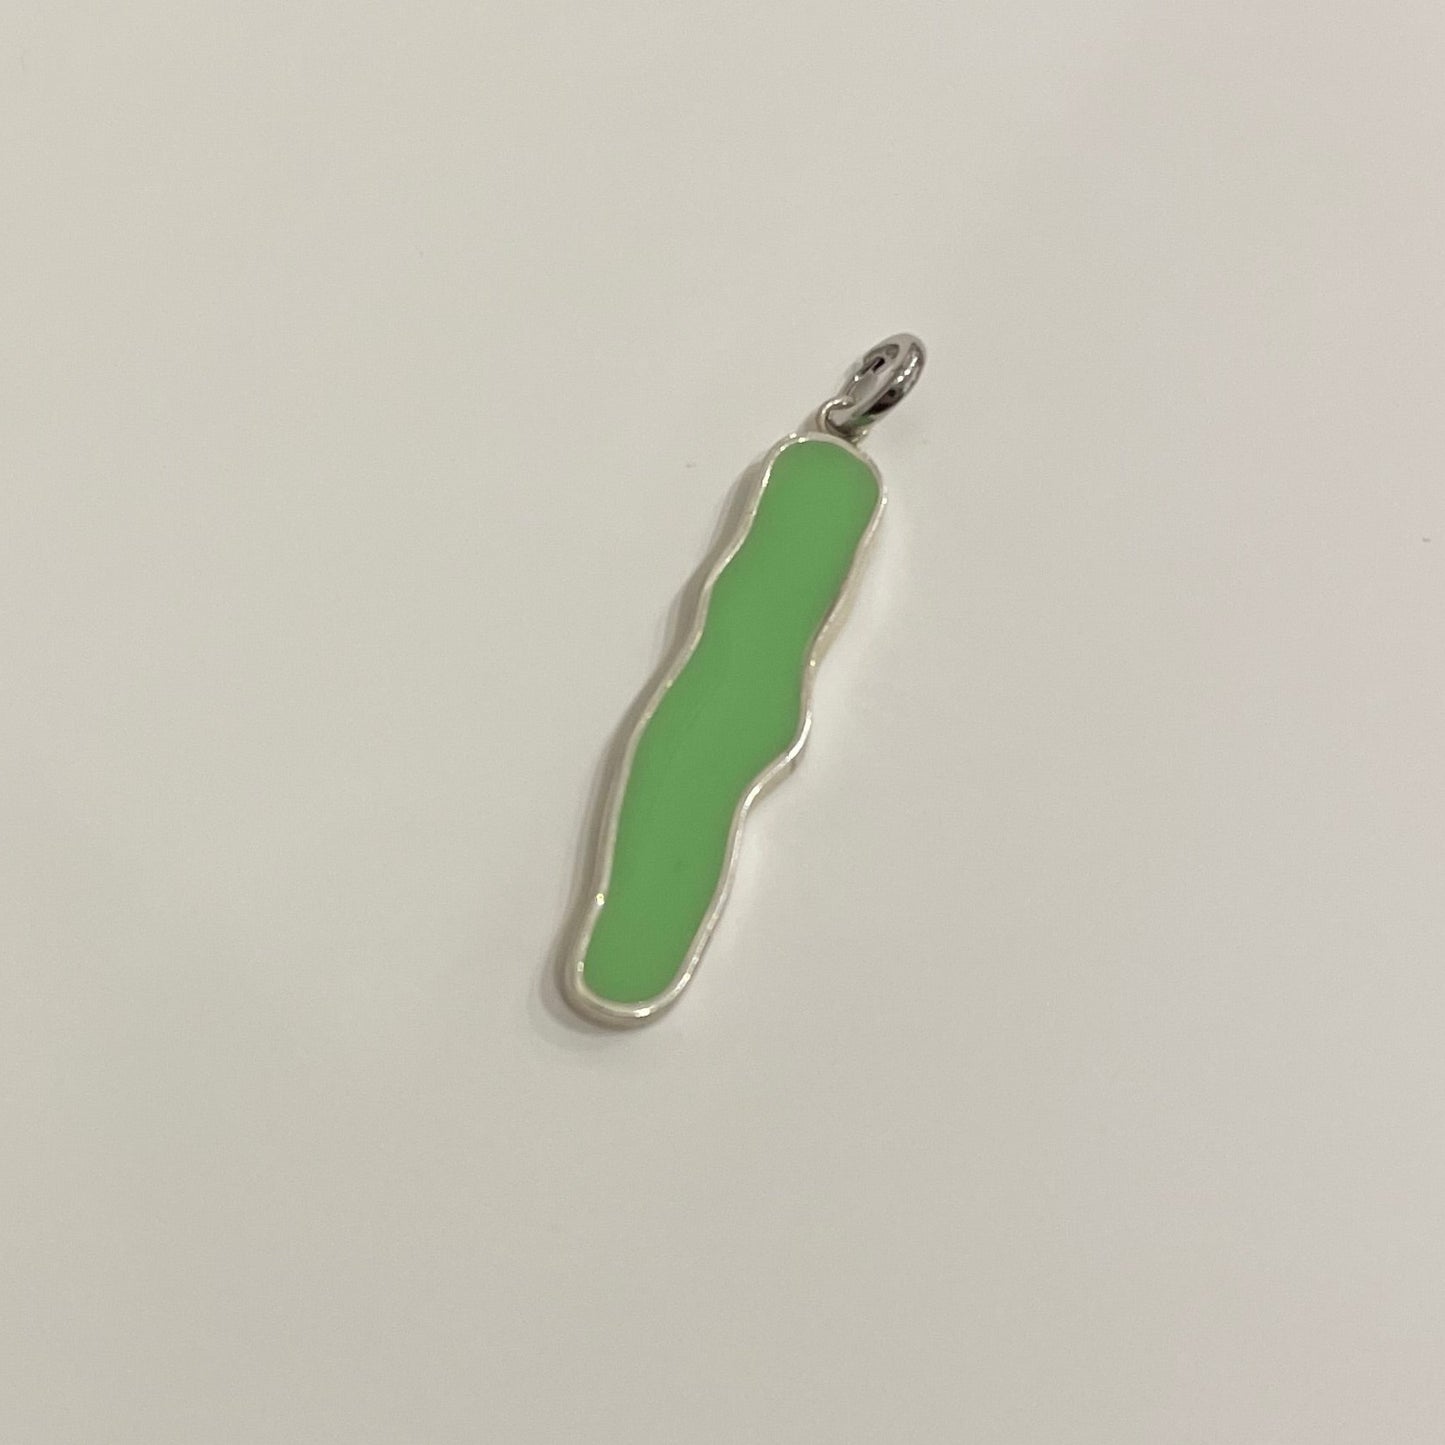 Long irregular shape clip-on charm made by silver and filed by green epoxy resin.